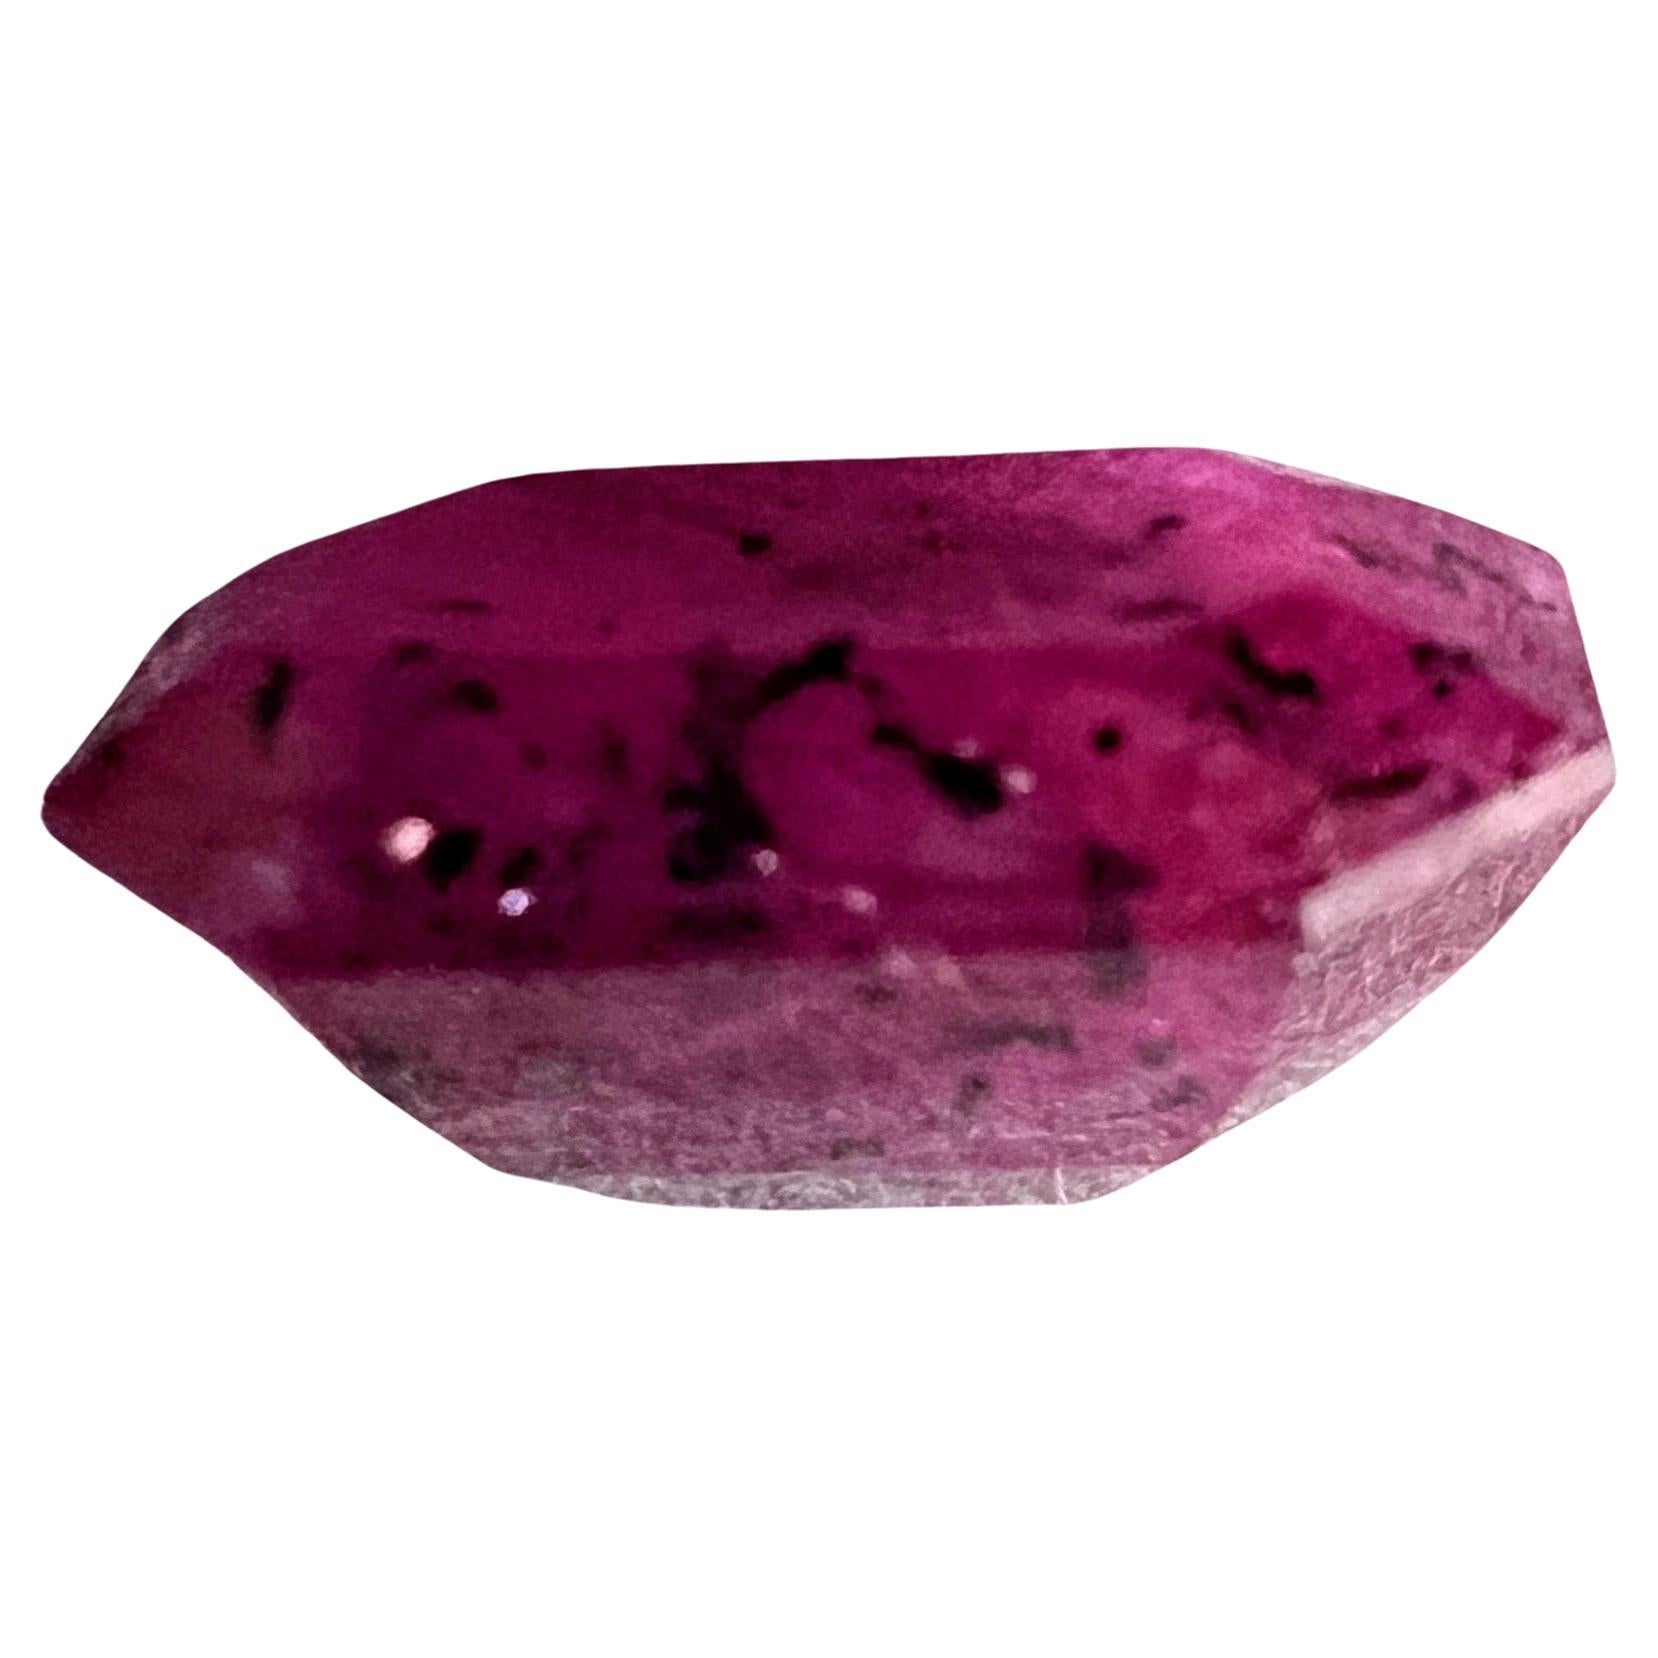 Octagon Cut NO RESERVE 4.285ct NATURAL RUBY  Octagonal Cut Loose Gemstone For Sale